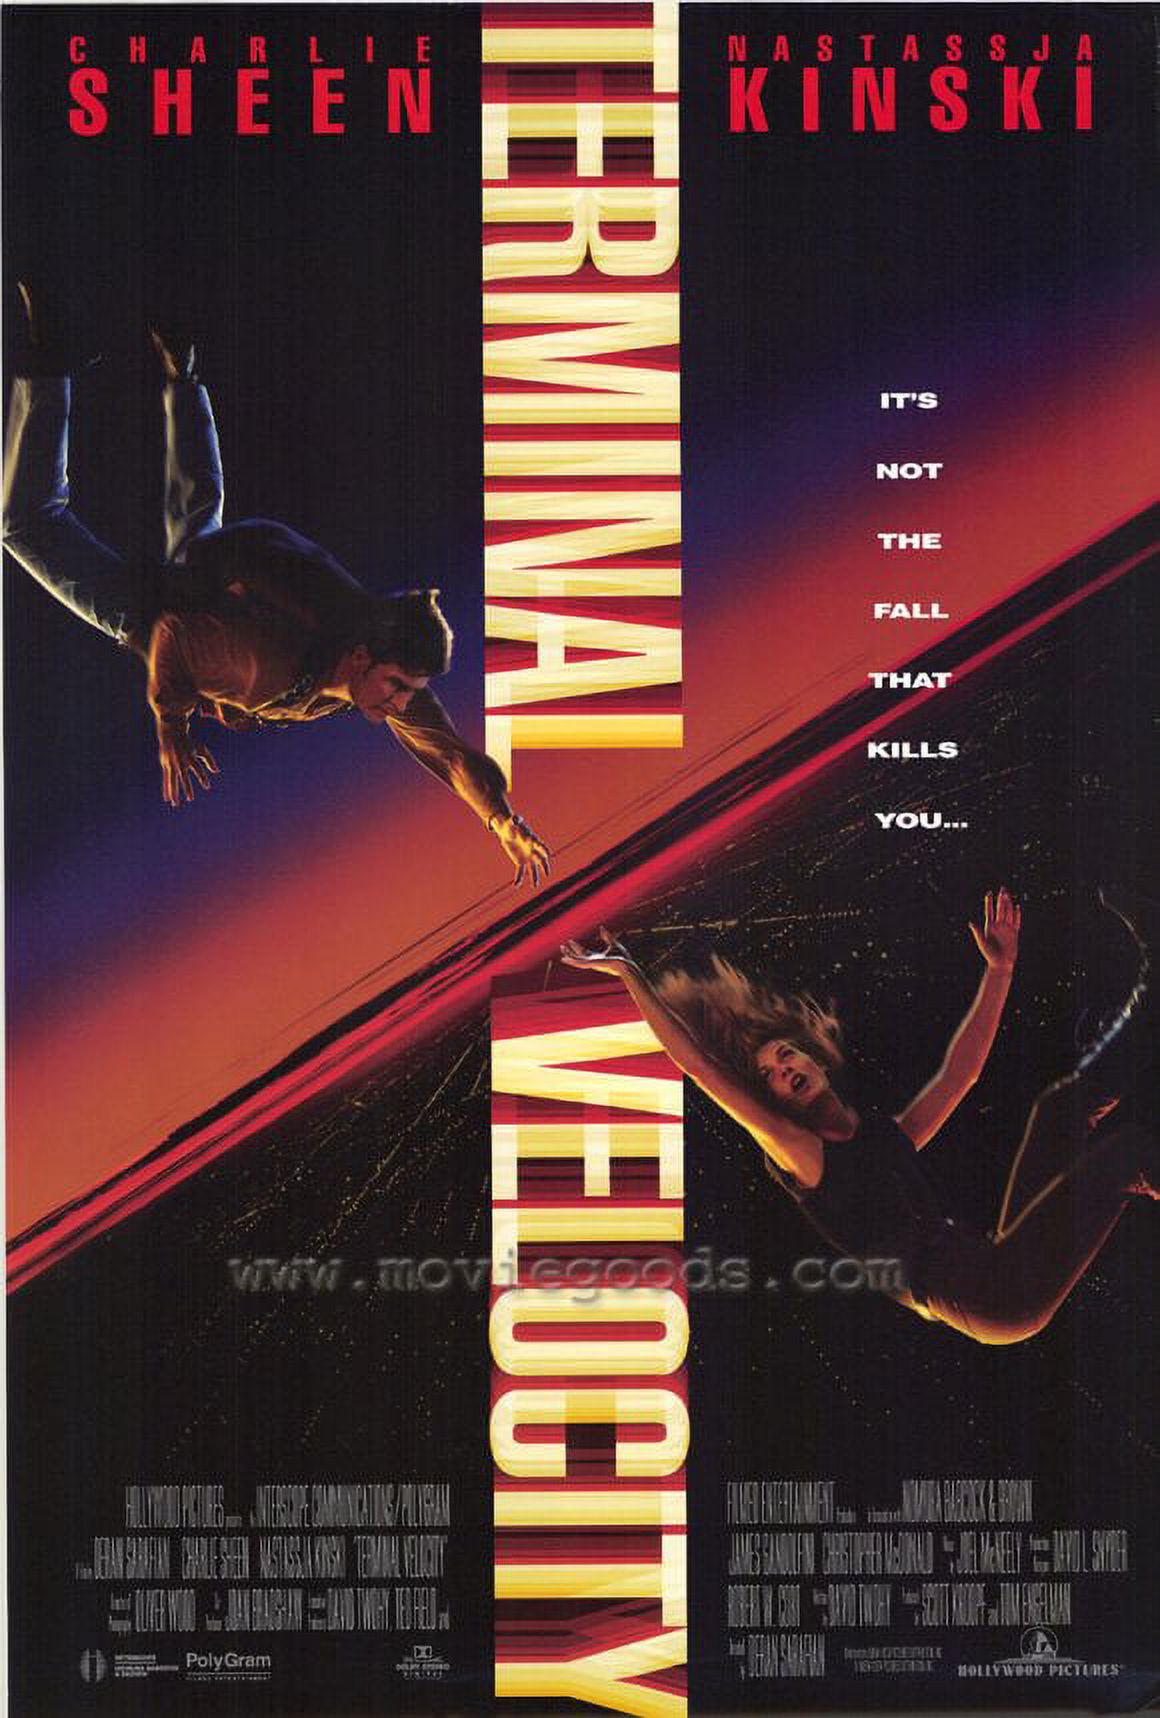 Terminal Velocity - movie POSTER (Style A) (27" x 40") (1994) - image 1 of 2